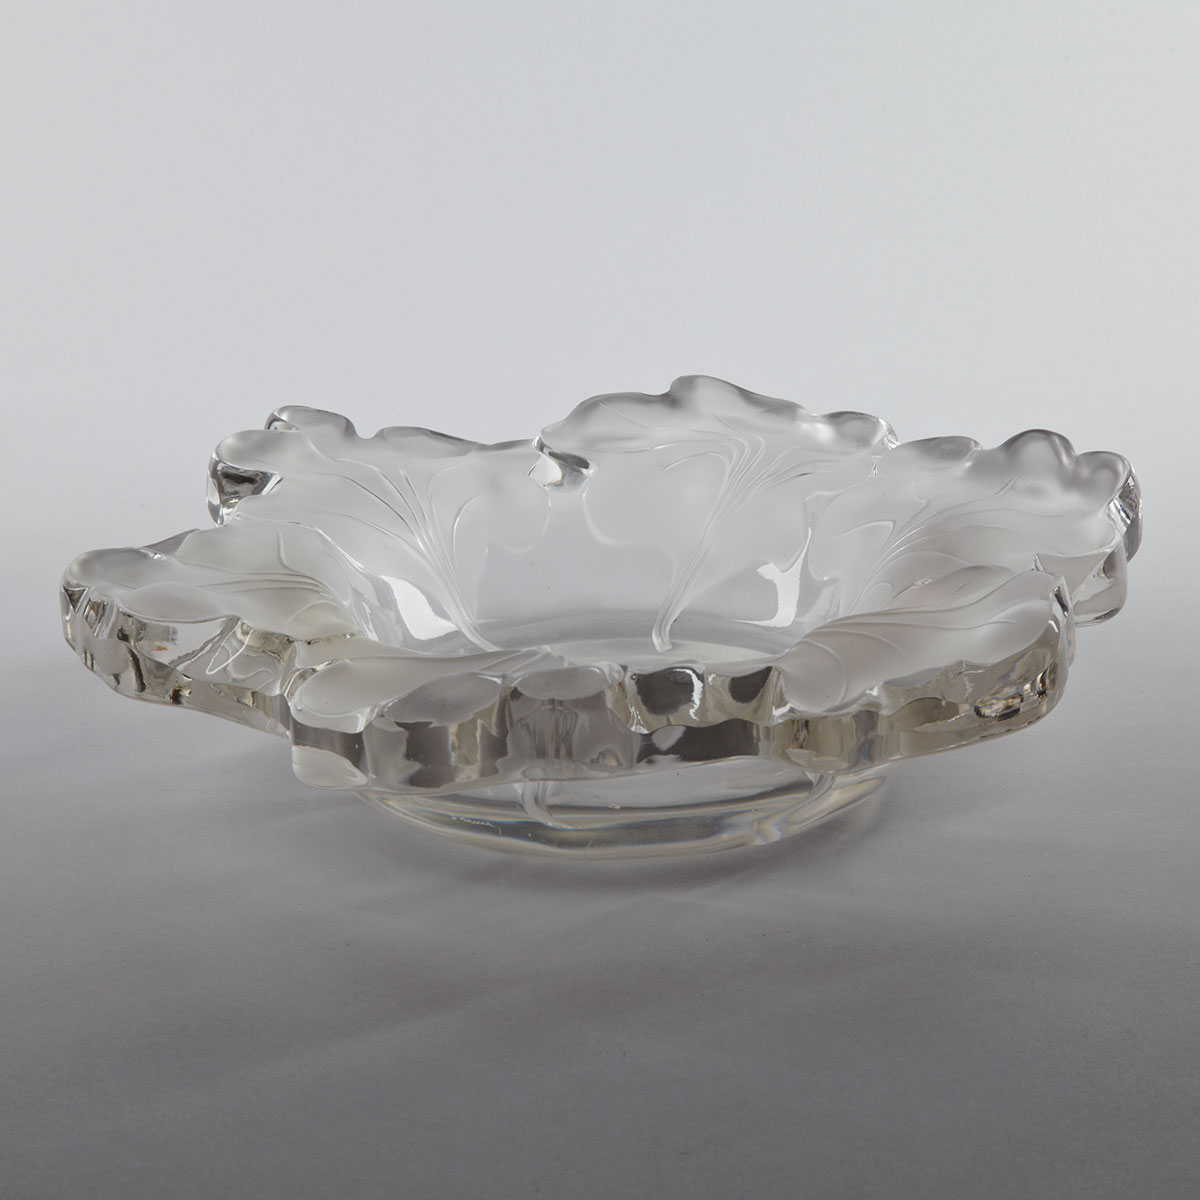 ‘Capucines’, Lalique Moulded and Partly Frosted Glass Bowl, post-1945